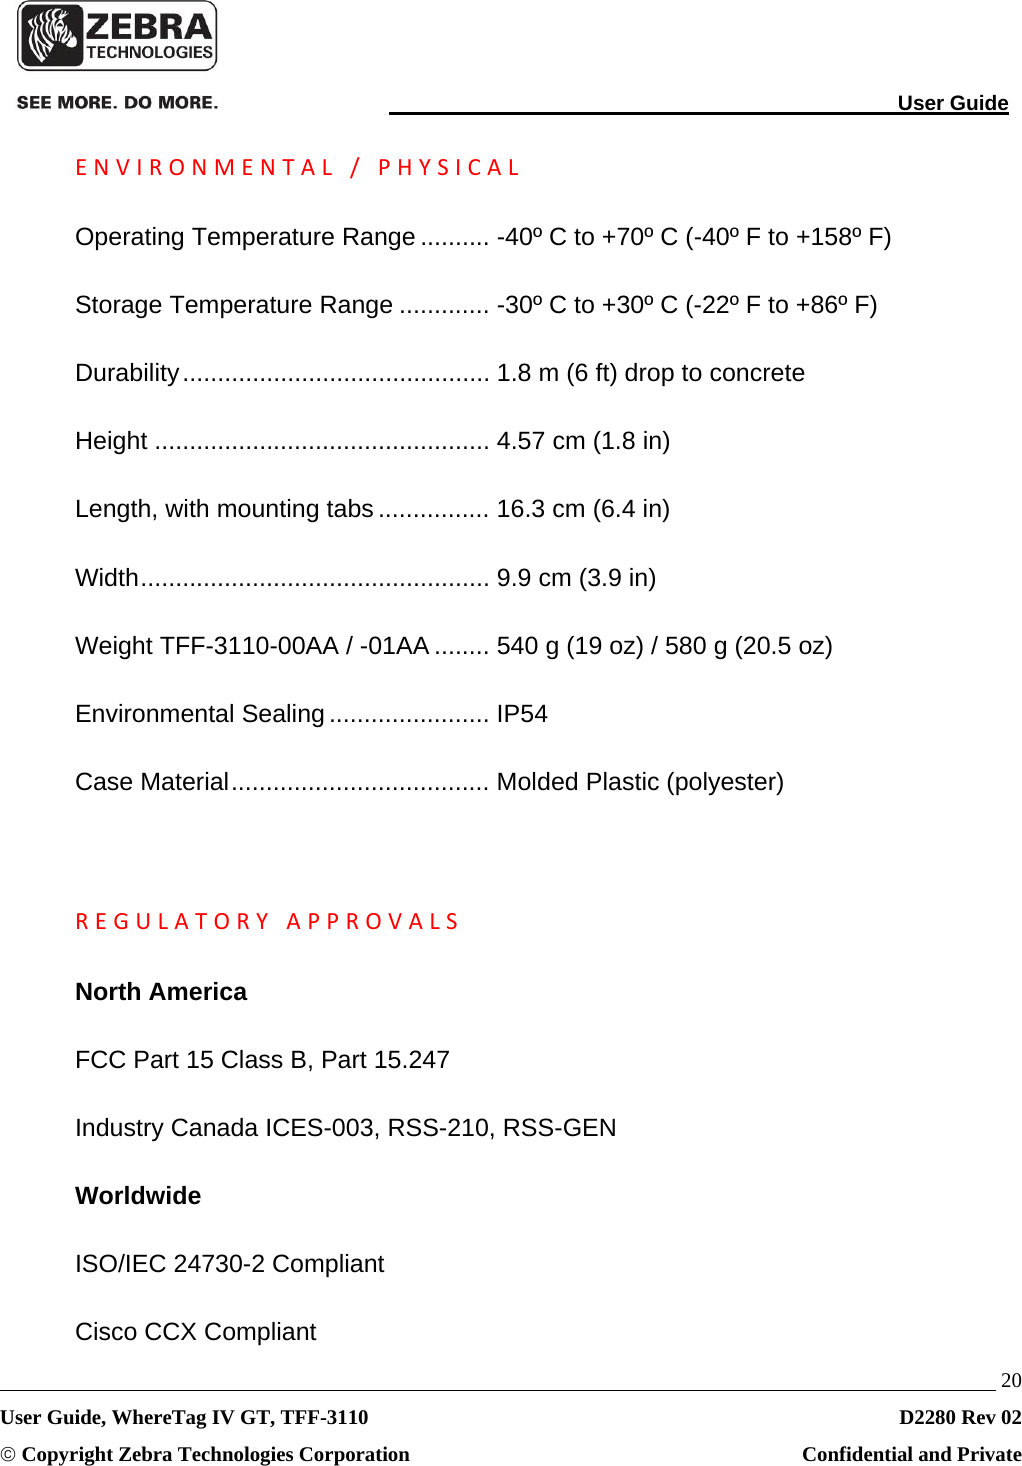                                                                                                                                User Guide   20 User Guide, WhereTag IV GT, TFF-3110  D2280 Rev 02 © Copyright Zebra Technologies Corporation  Confidential and Private ENVIRONMENTAL/PHYSICALOperating Temperature Range .......... -40º C to +70º C (-40º F to +158º F) Storage Temperature Range ............. -30º C to +30º C (-22º F to +86º F) Durability ............................................  1.8 m (6 ft) drop to concrete Height ................................................ 4.57 cm (1.8 in) Length, with mounting tabs ................ 16.3 cm (6.4 in) Width ..................................................  9.9 cm (3.9 in) Weight TFF-3110-00AA / -01AA ........ 540 g (19 oz) / 580 g (20.5 oz) Environmental Sealing ....................... IP54 Case Material ..................................... Molded Plastic (polyester) REGULATORYAPPROVALSNorth America FCC Part 15 Class B, Part 15.247 Industry Canada ICES-003, RSS-210, RSS-GEN Worldwide ISO/IEC 24730-2 Compliant Cisco CCX Compliant 